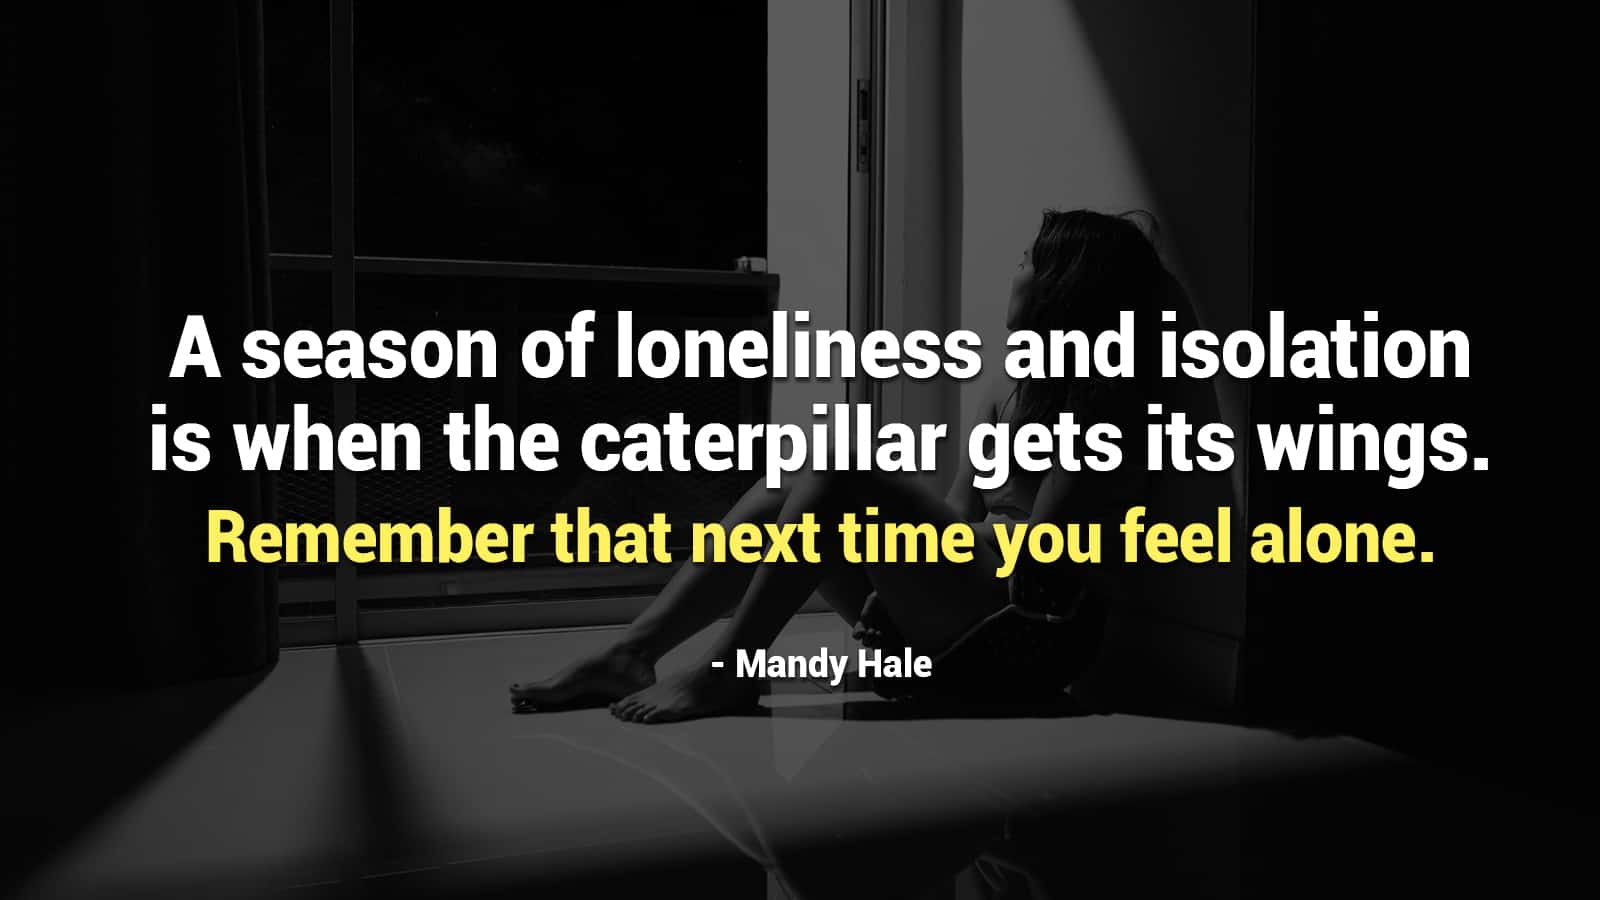 20 Quotes to Read Whenever You’re Feeling Lonely